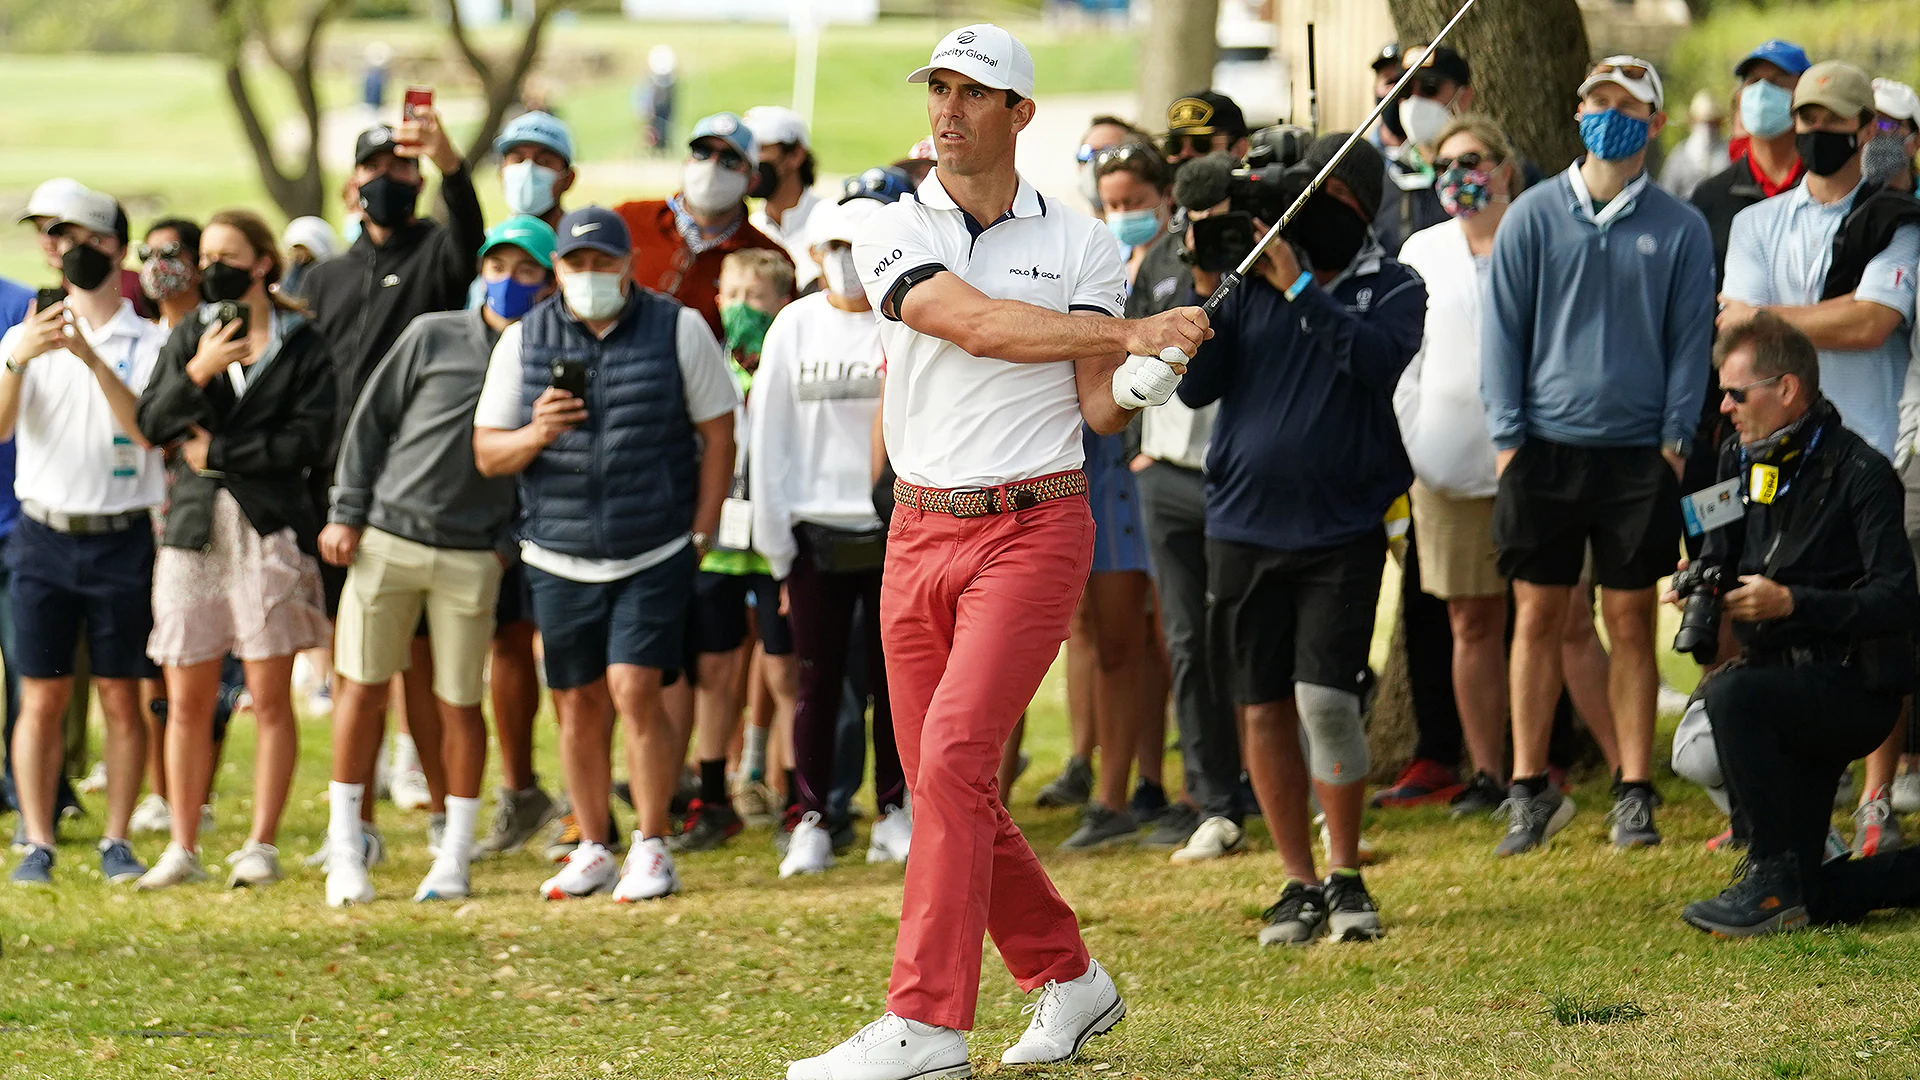 ‘Ah, Billy, you talked yourself into that one’: Horschel on squirrely shot